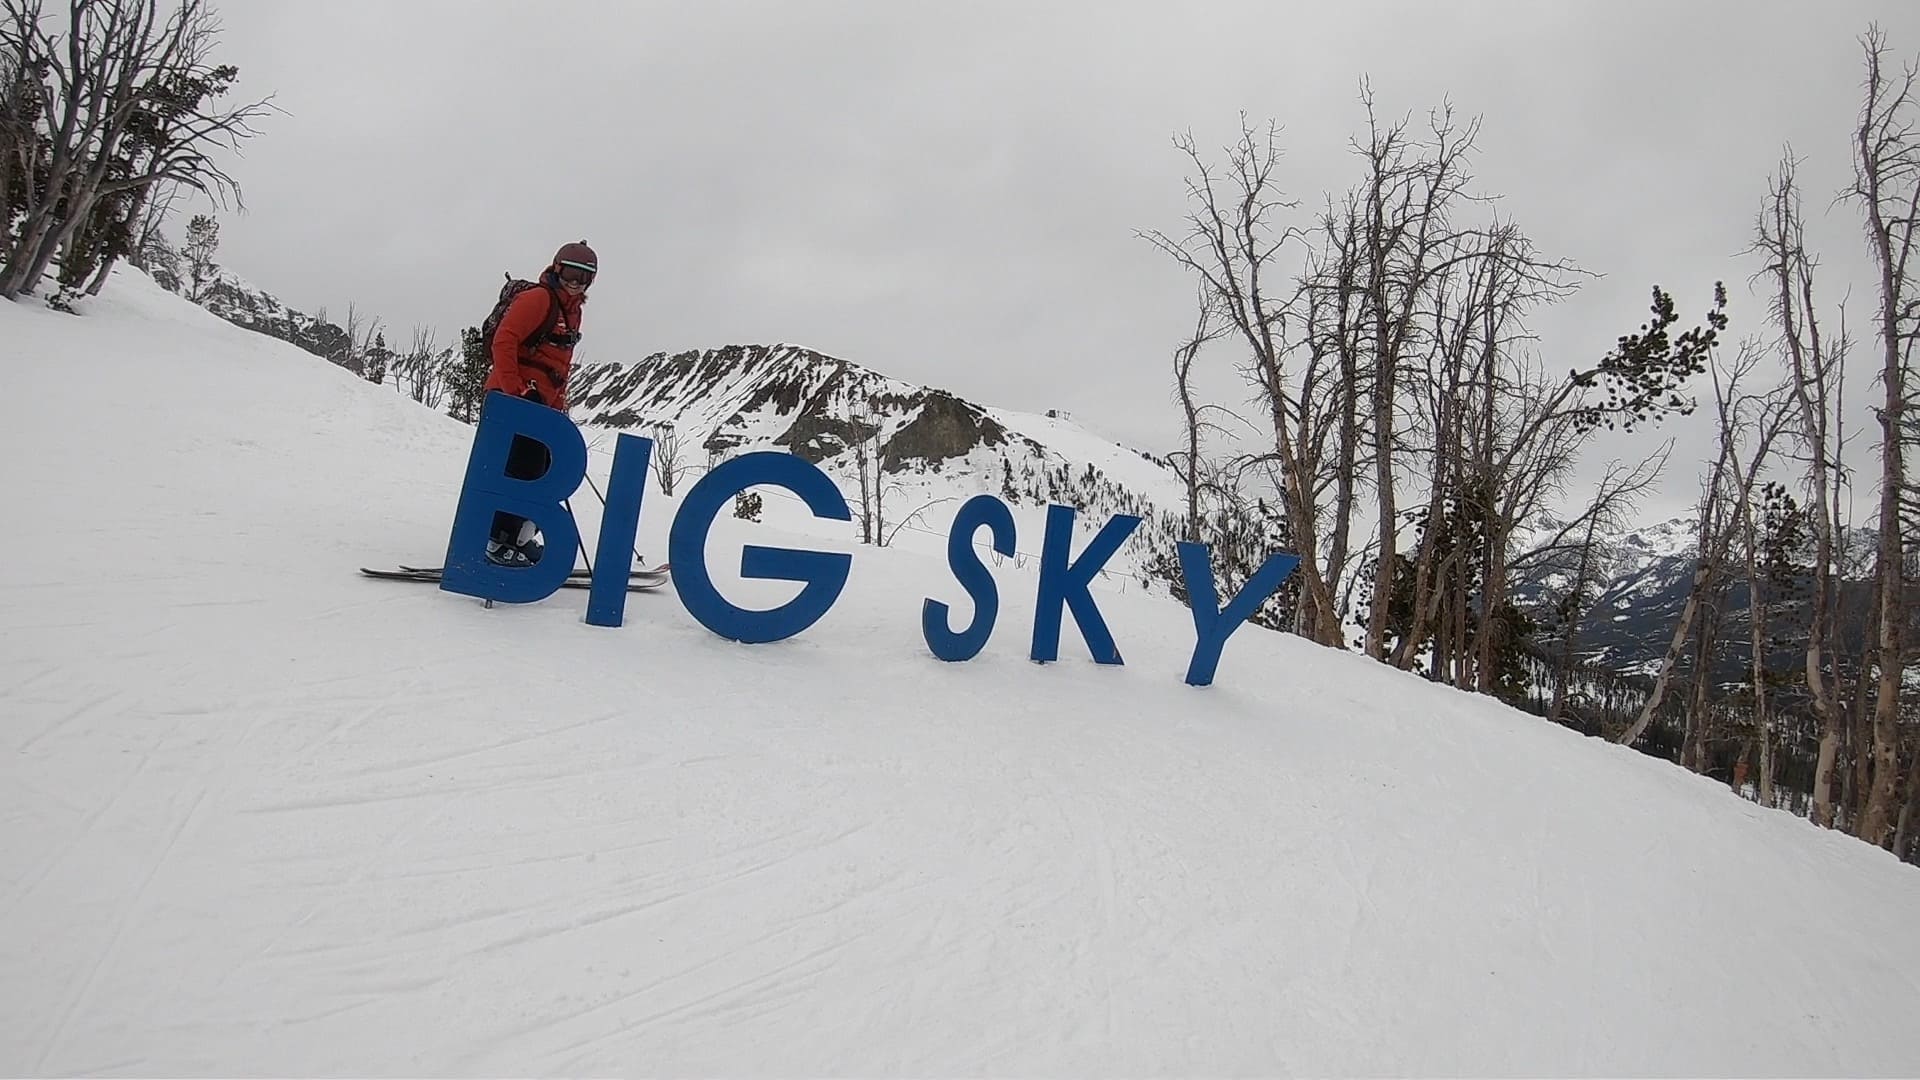 Big Sky on Mountain Sign with Skier